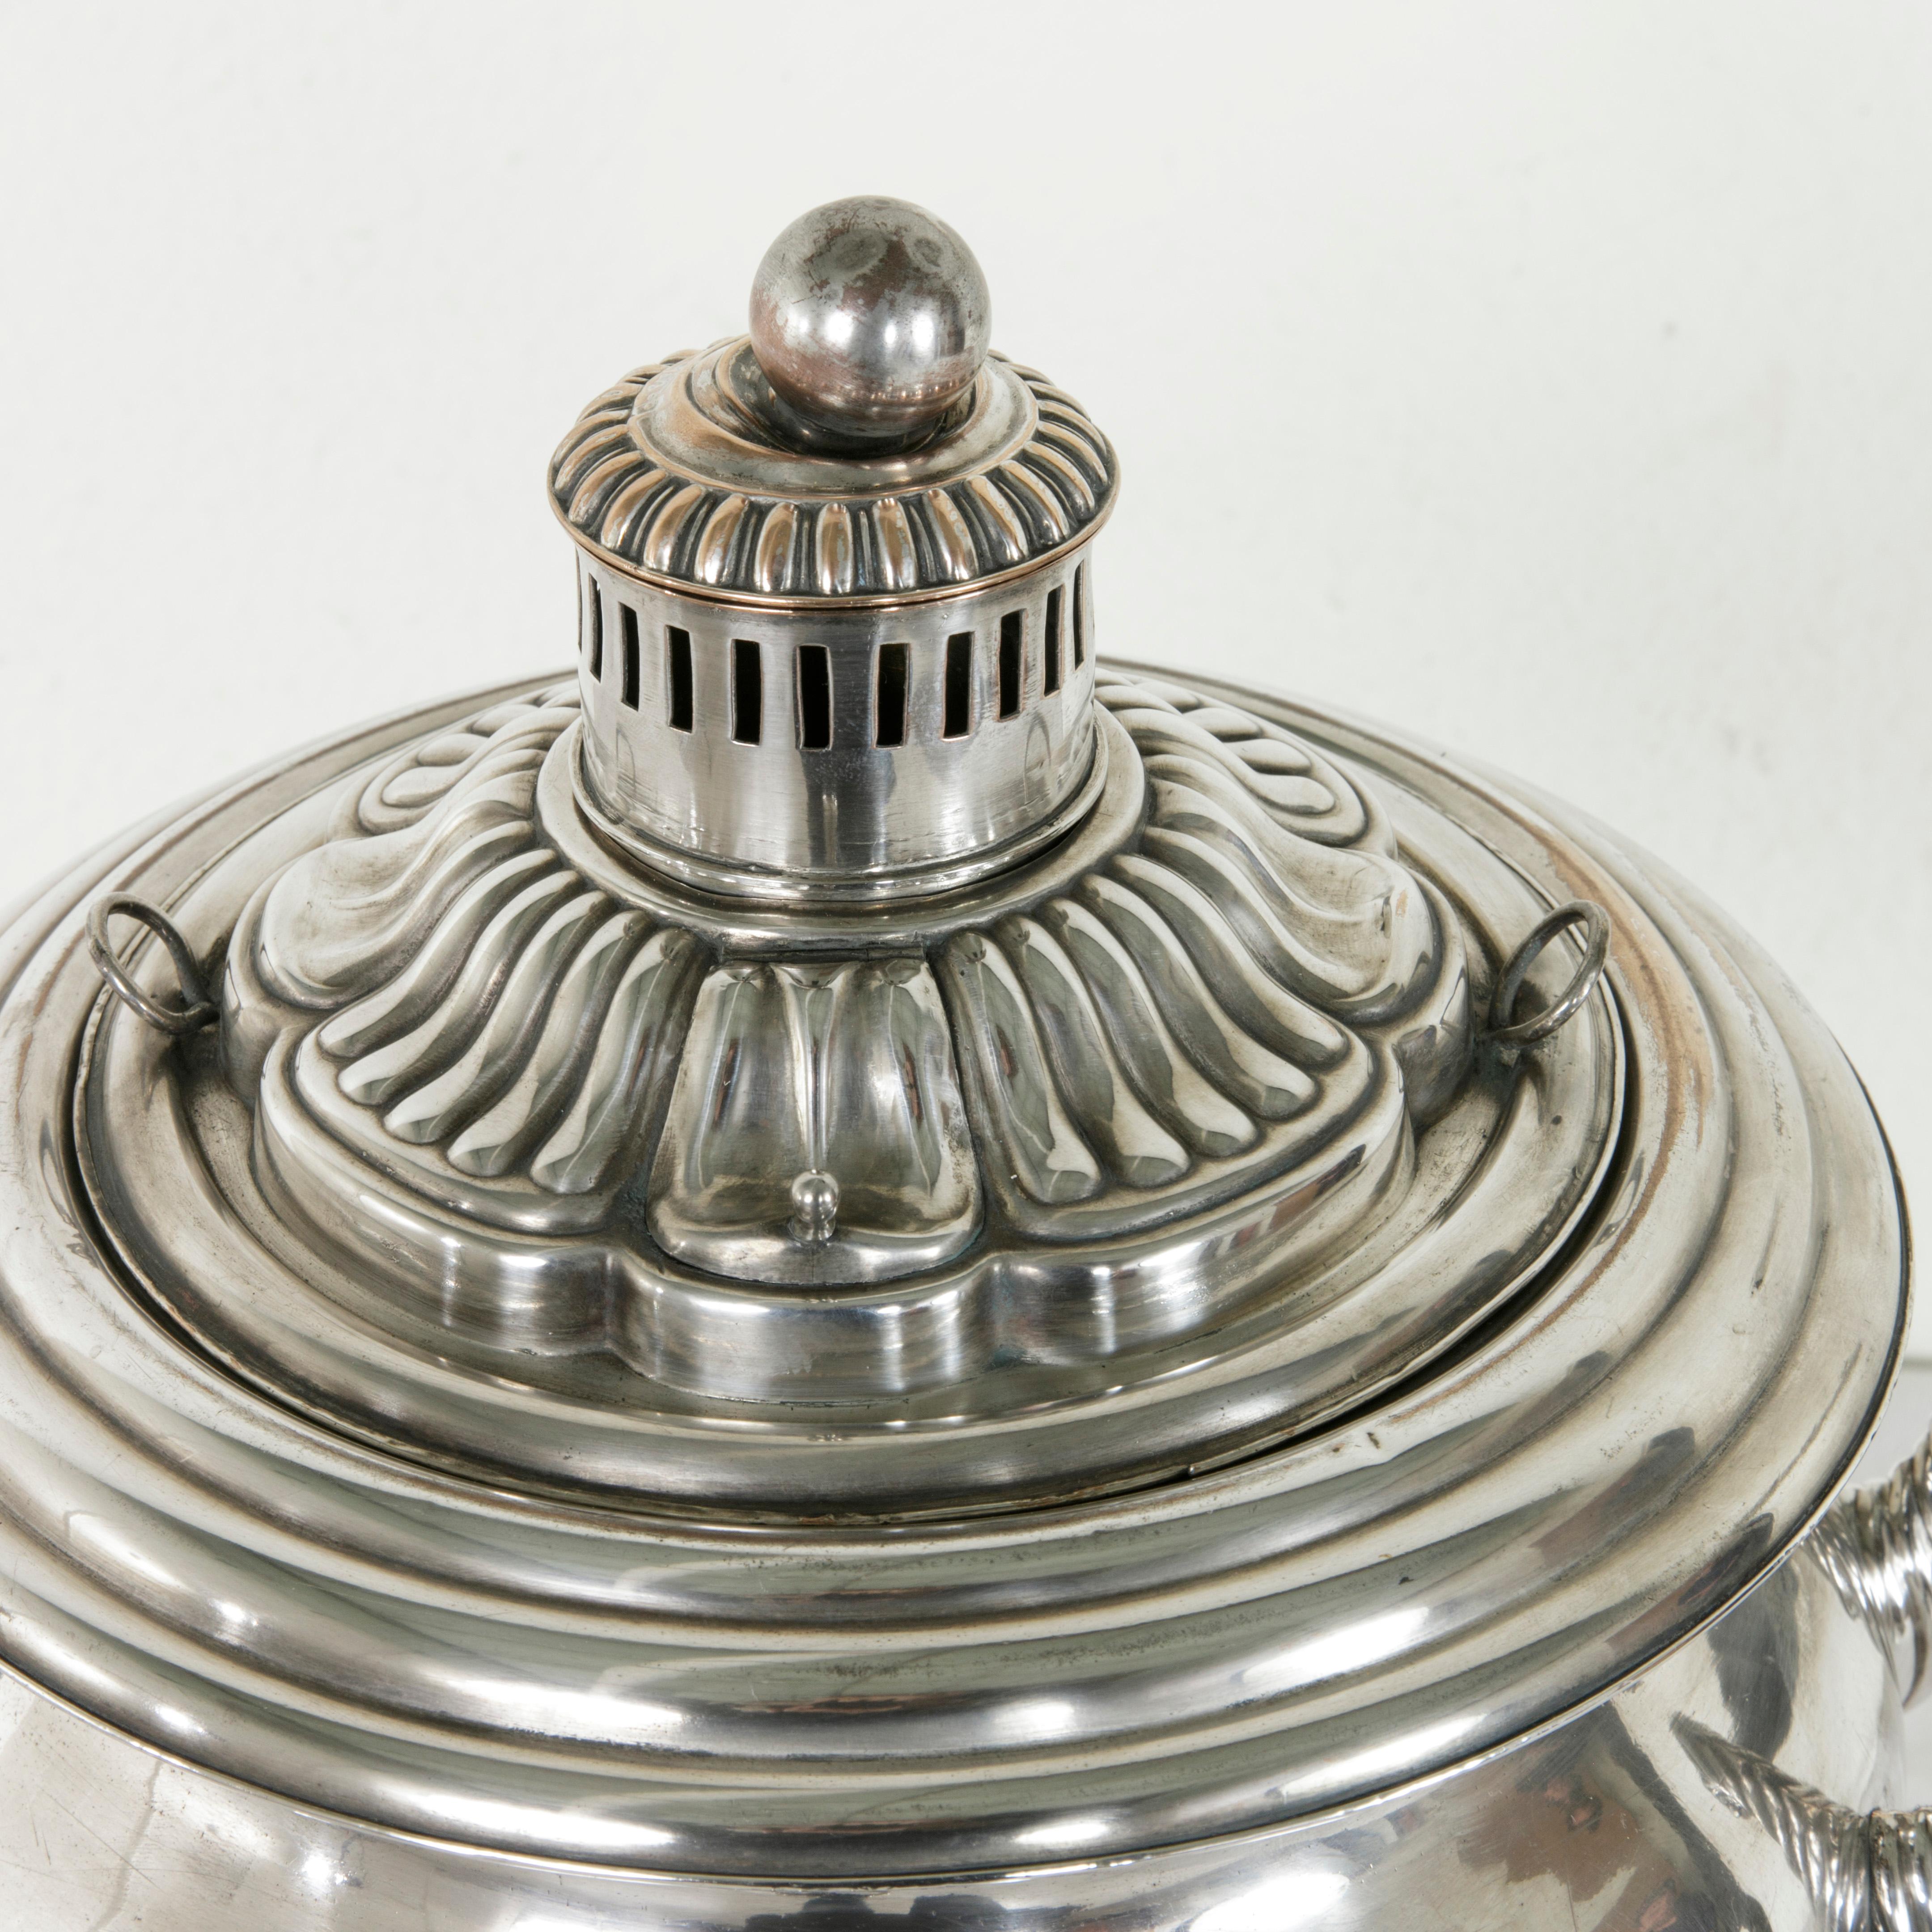 Late 19th Century Silver Samovar or Tea Urn with Lid and Ebonized Handles 1